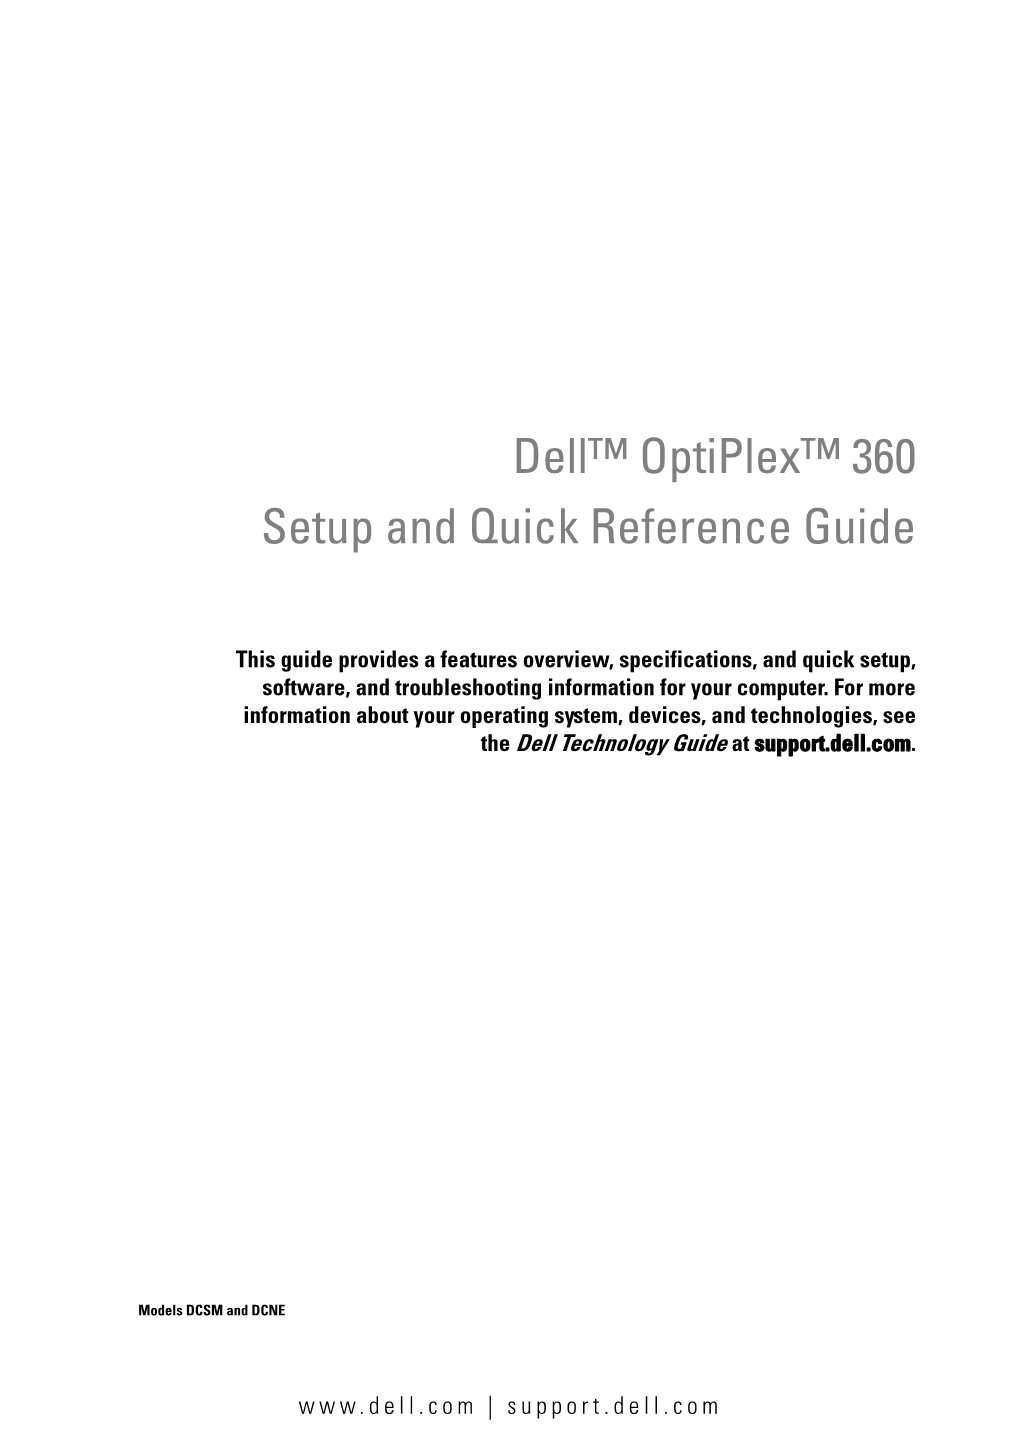 Dell Optiplex 360 Setup and Quick Reference Guide